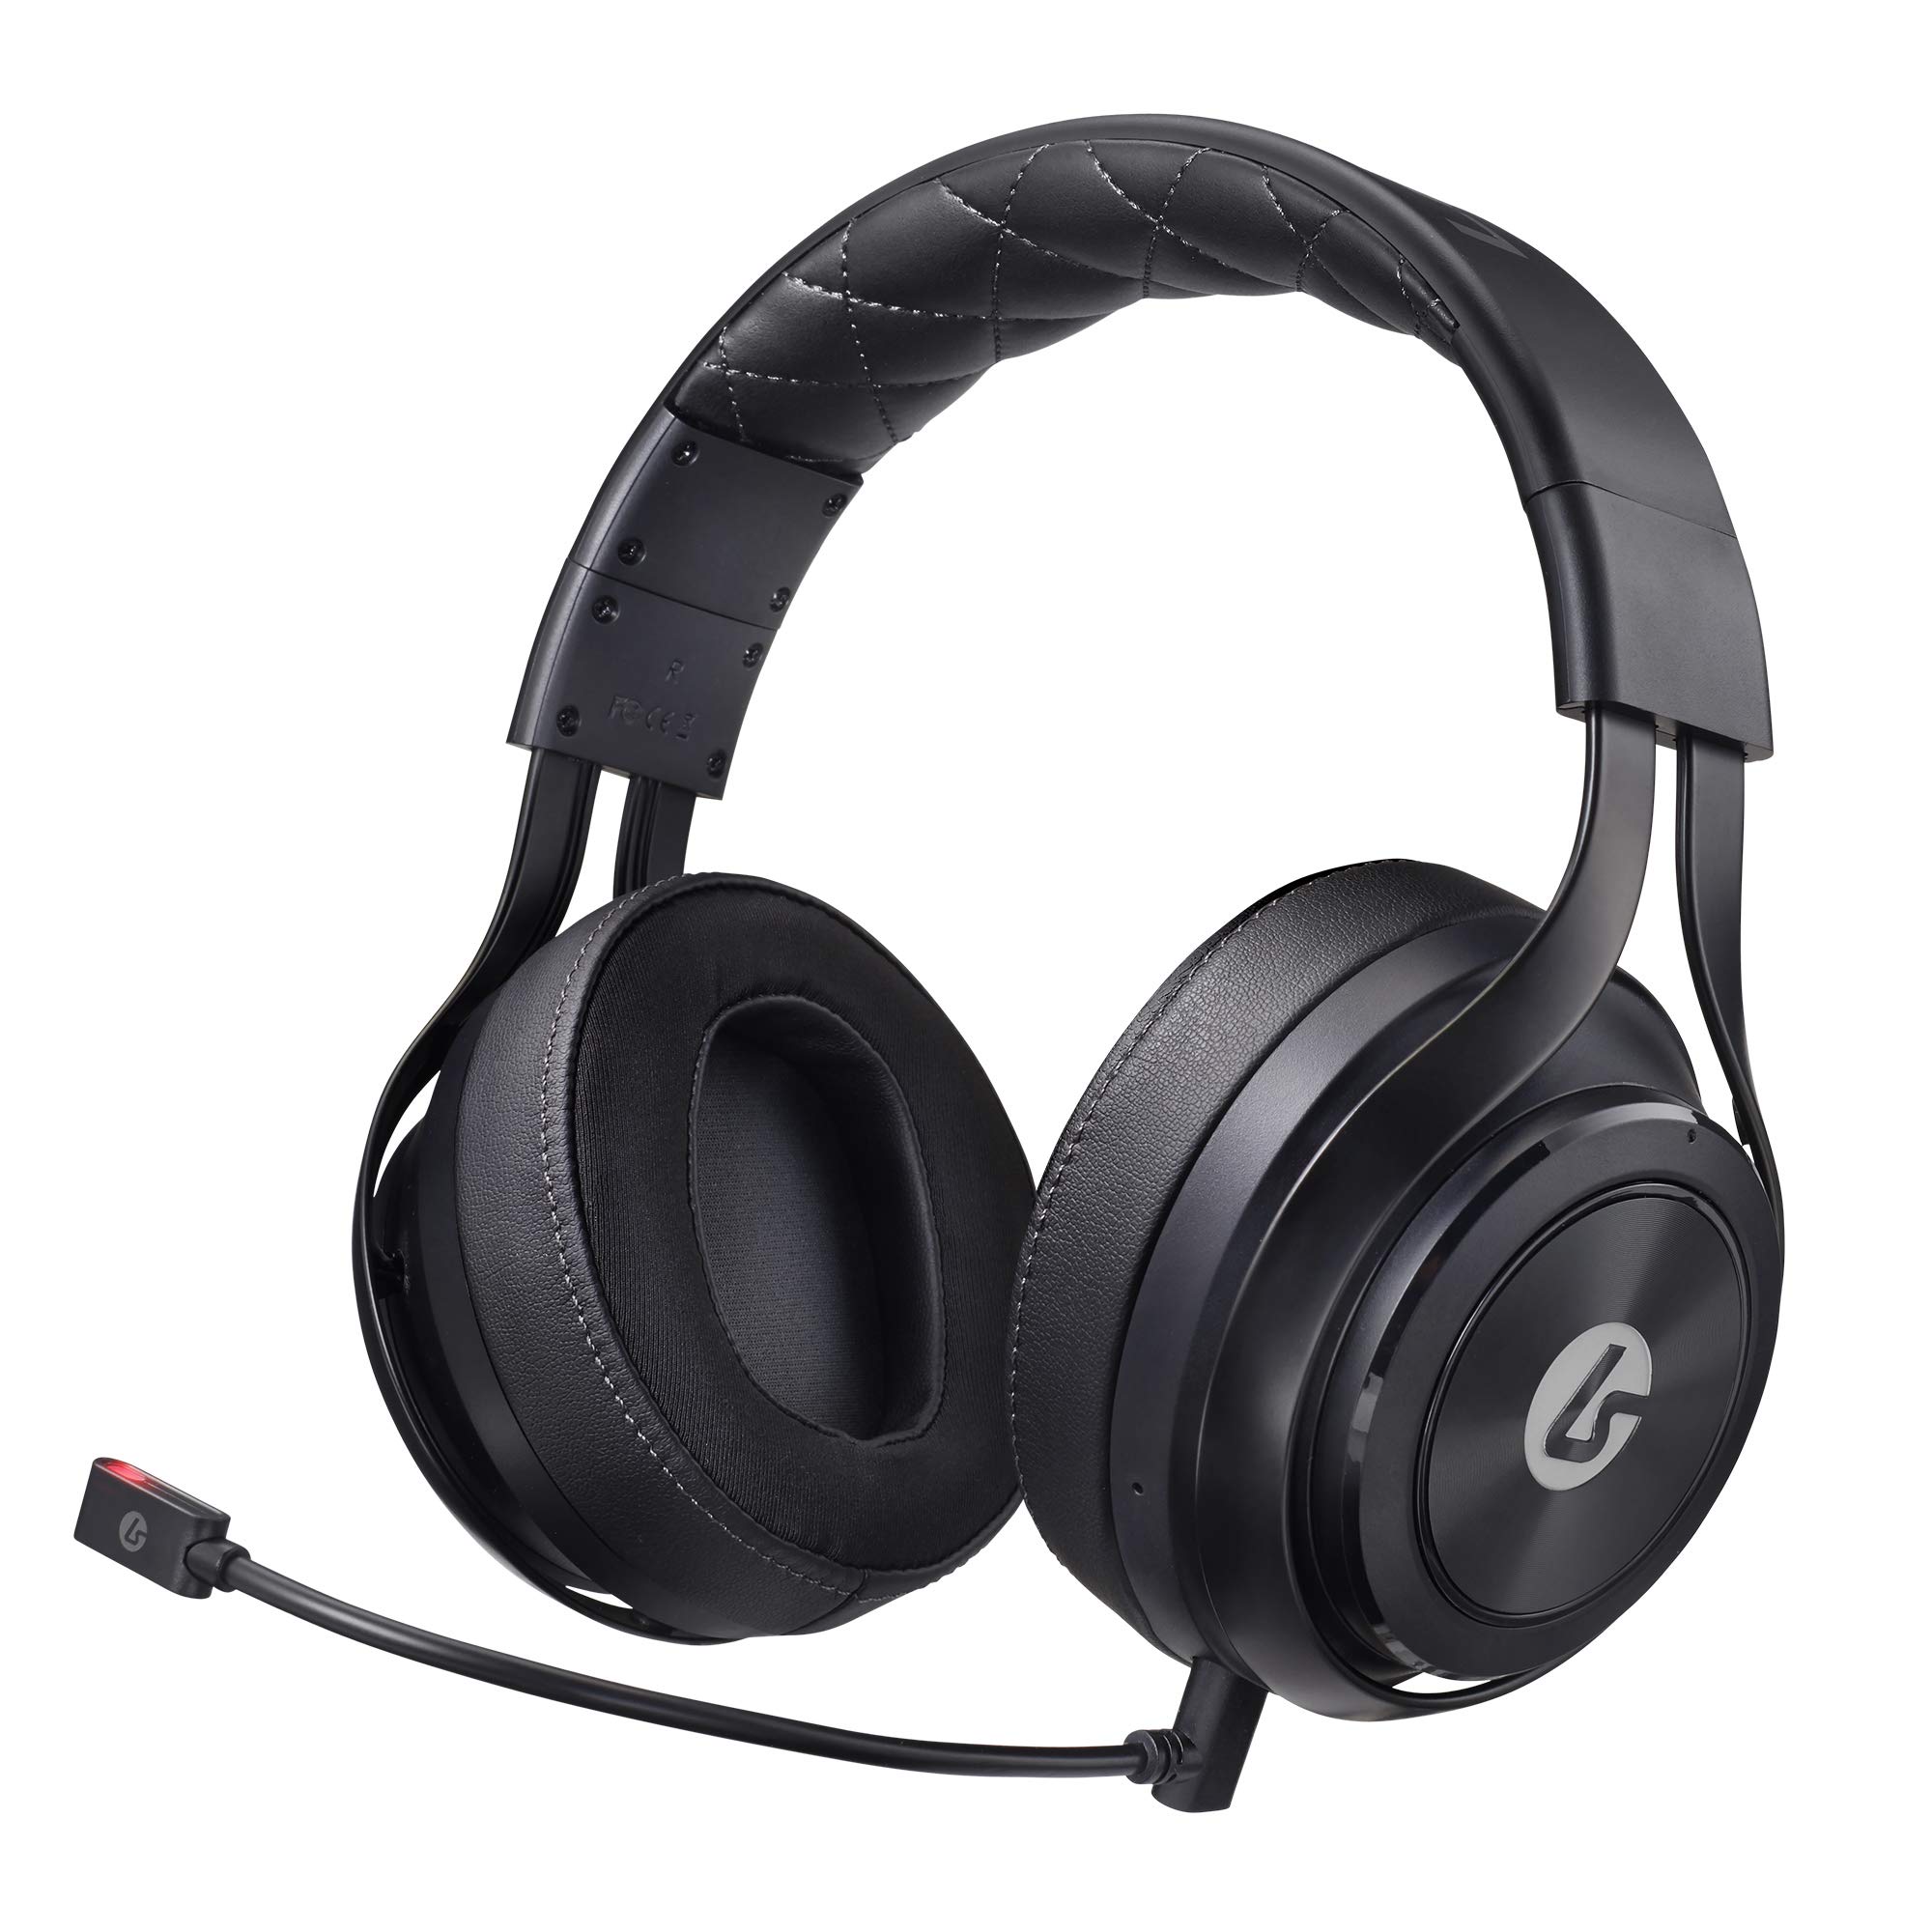 LucidSound LS35X Wireless Surround Sound Over-the-Ear Gaming Headset for Xbox Series X|S w/ Dual Mics (Black) $52.92 + Free Shipping